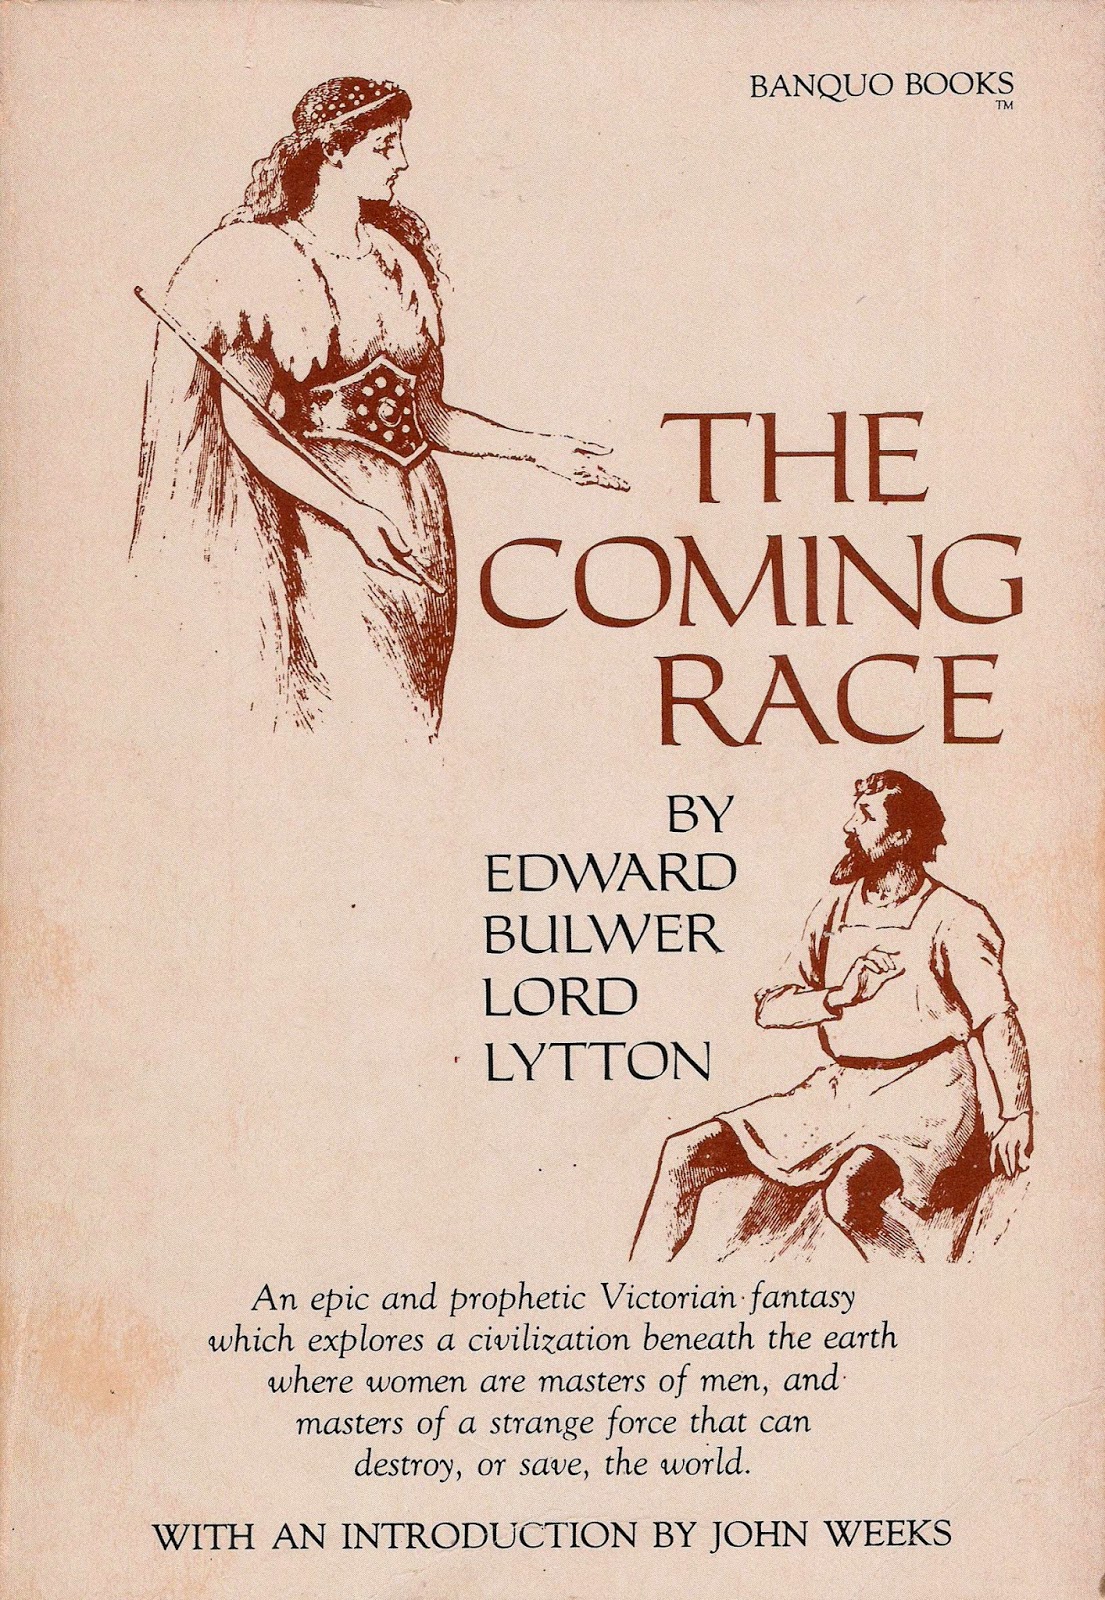 Bulwer-Lytton 1871 - The Coming Race